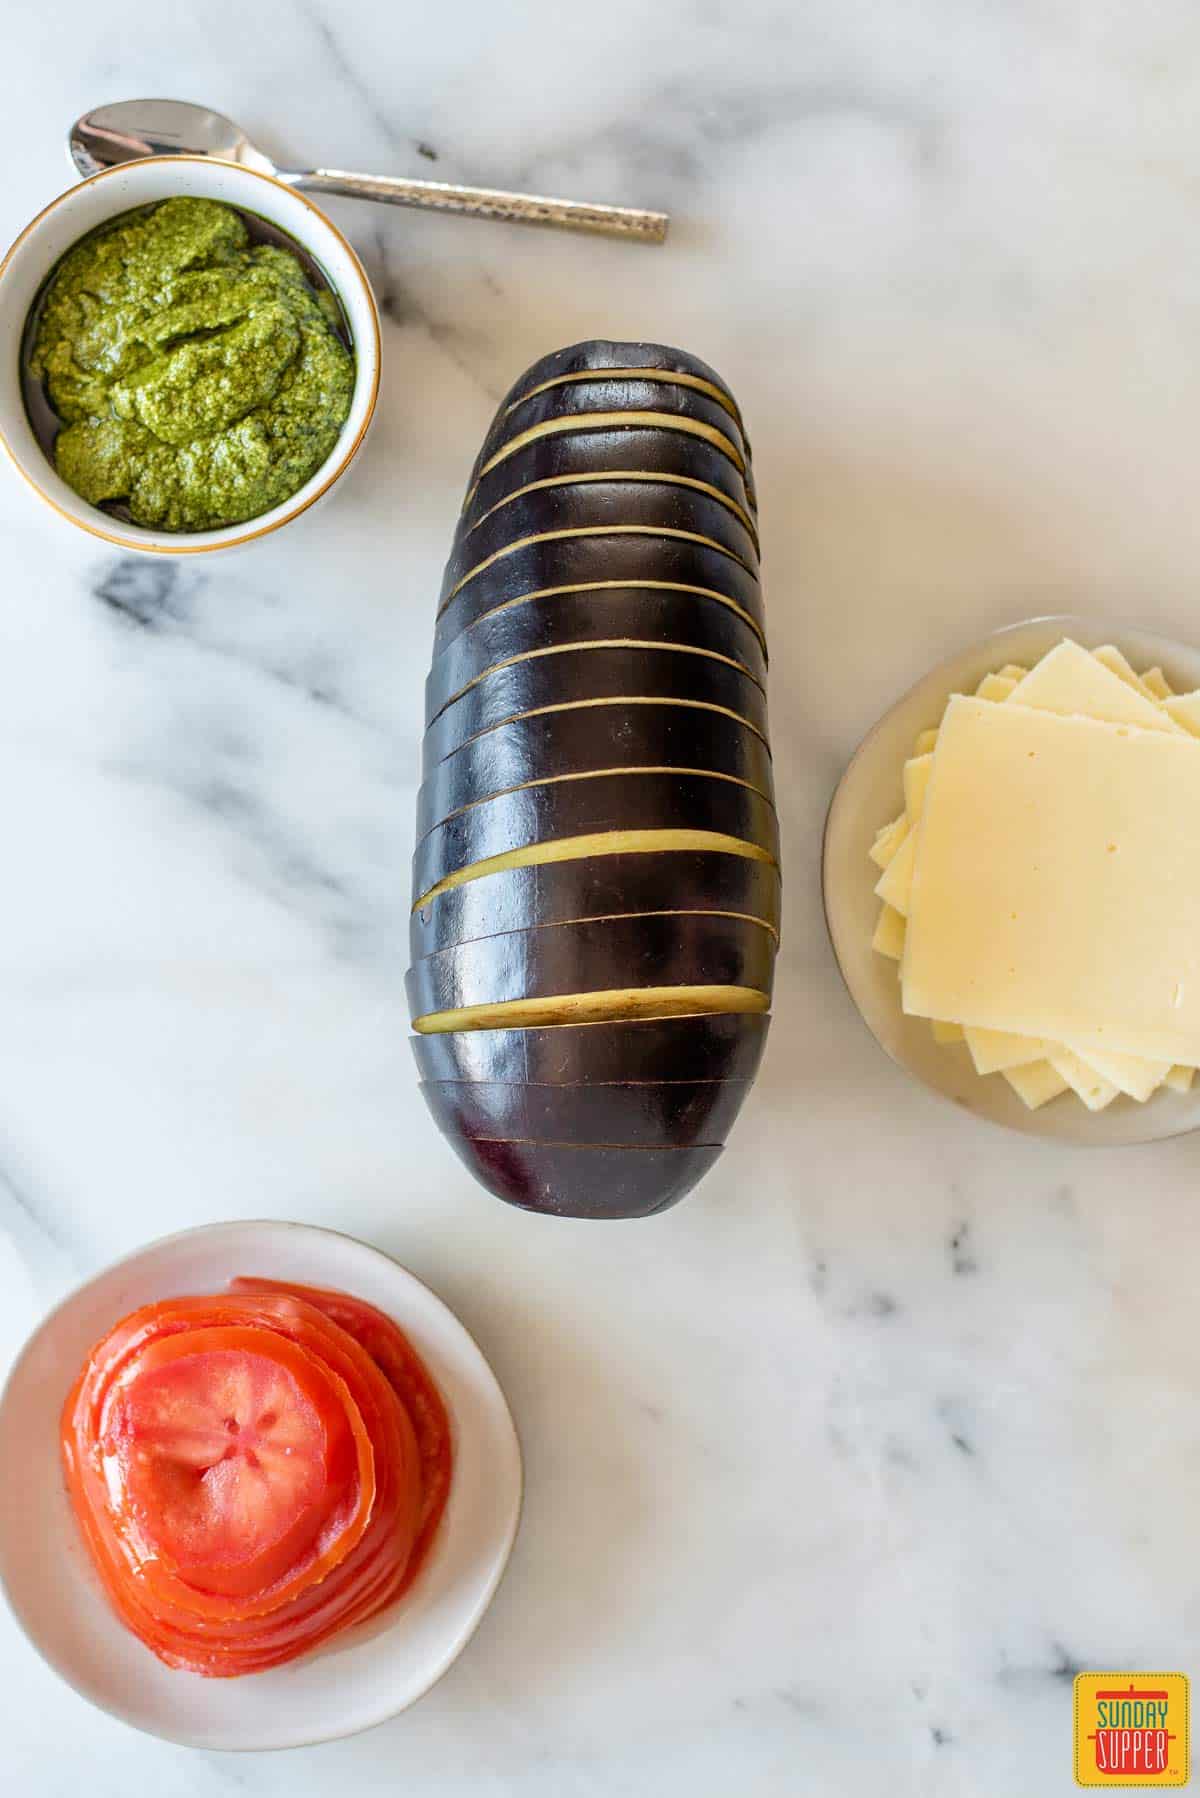 Pesto, tomatoes, and cheese in bowls next to an eggplant that's been sliced